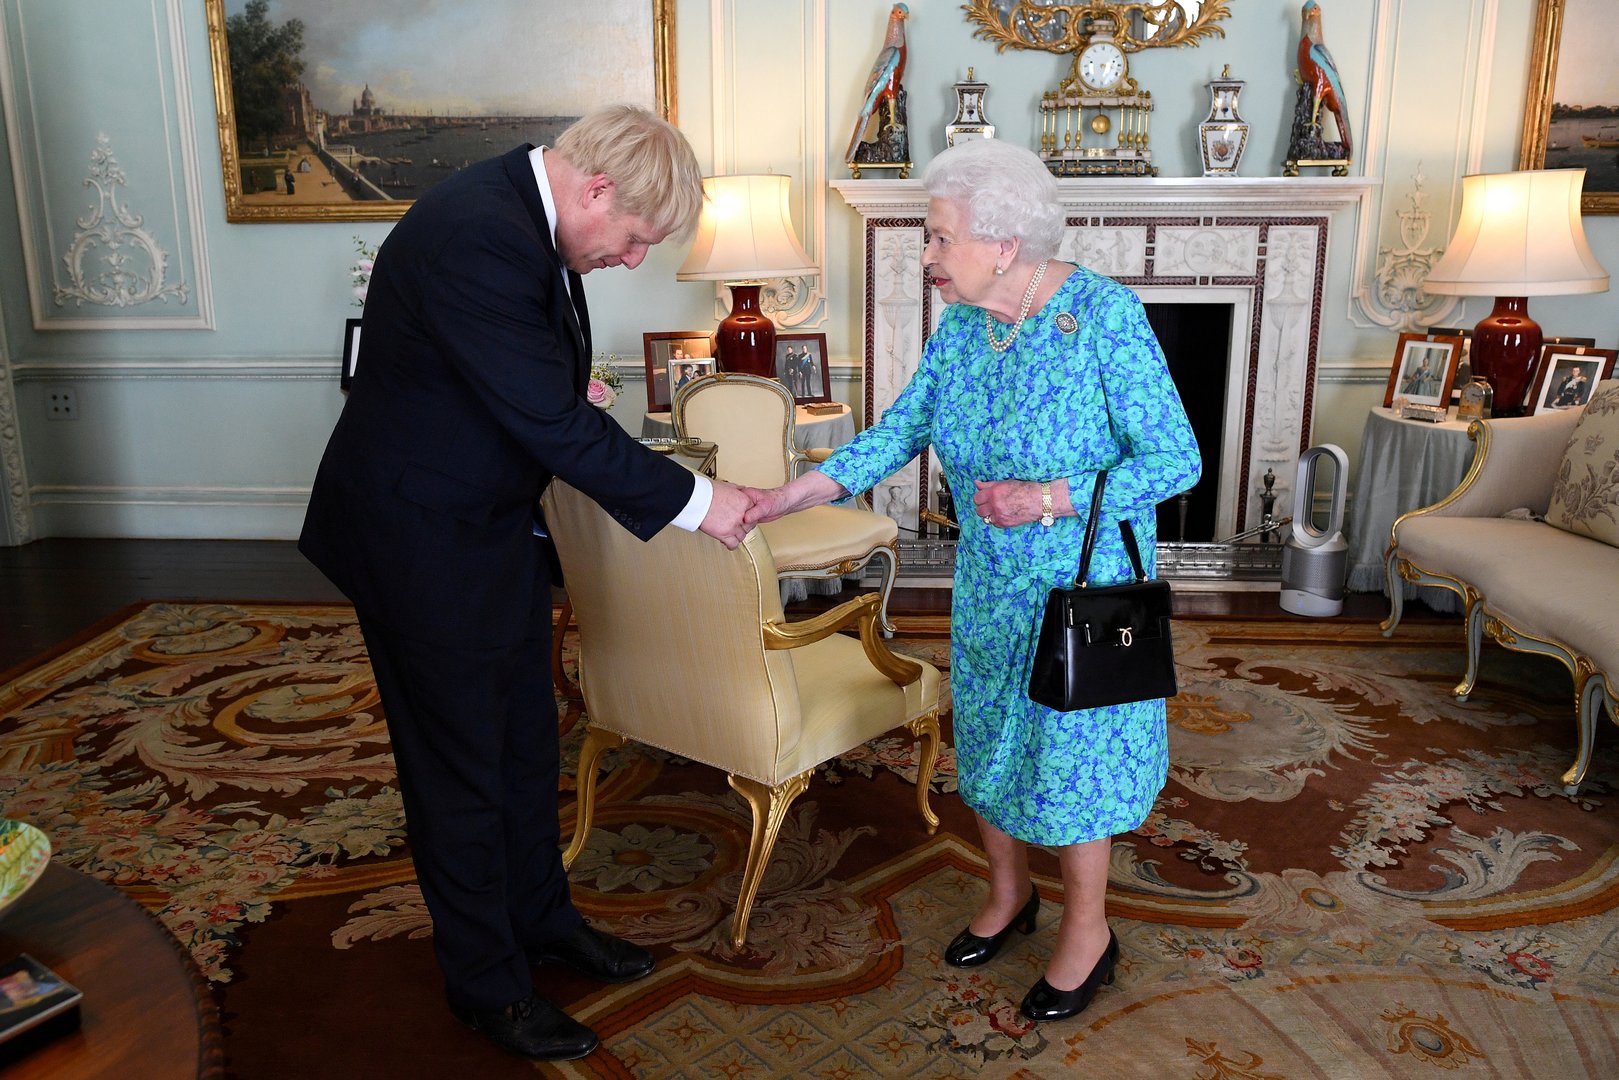 image Steering clear of royal accusations, UK&#8217;s Johnson praises the Queen